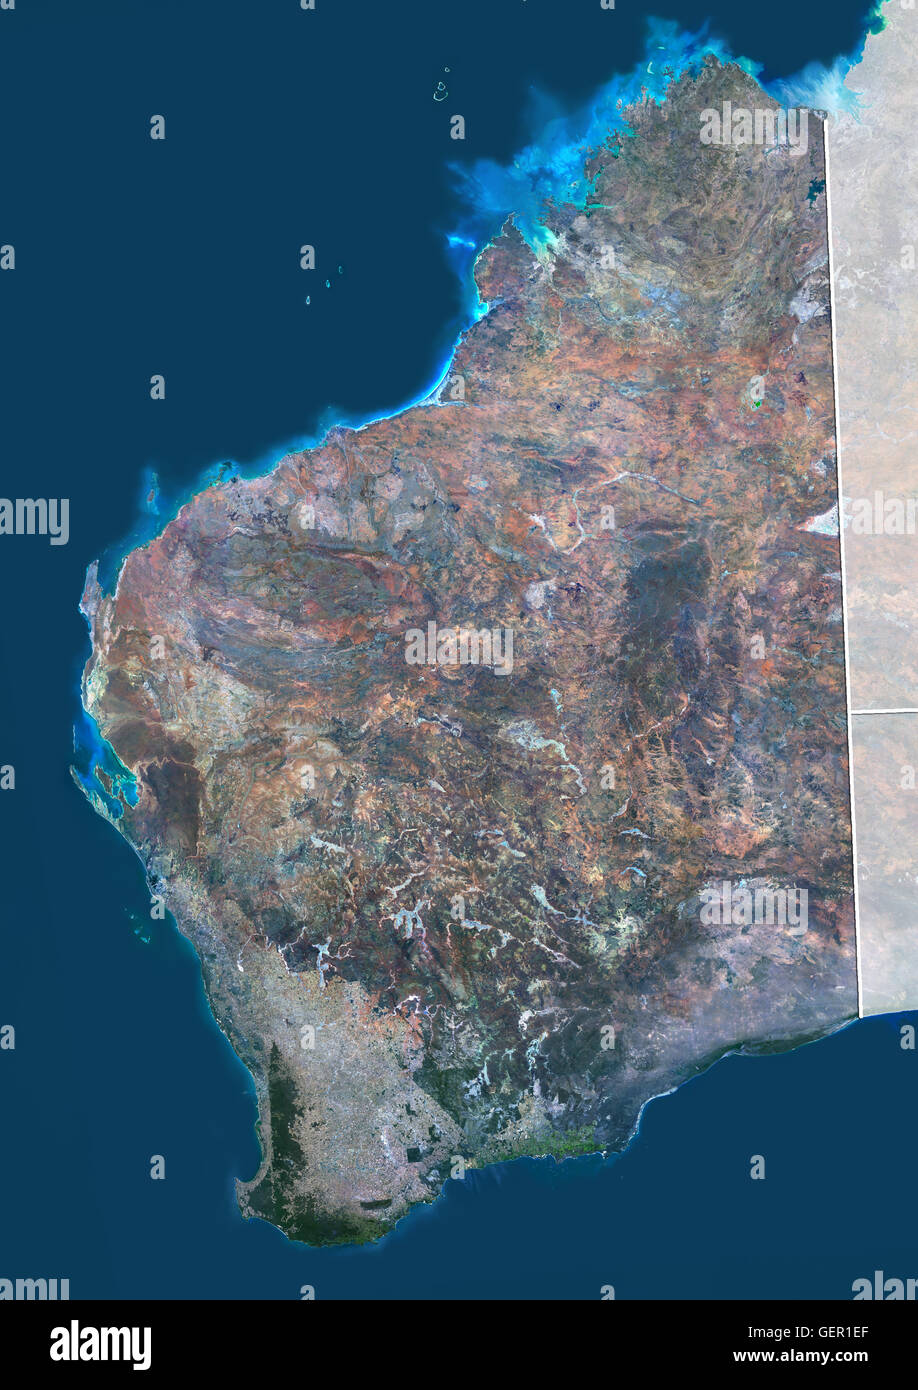 Satellite view of Western Australia (with administrative boundaries and mask). This image was compiled from data acquired by Landsat 8 satellite in 2014. Stock Photo